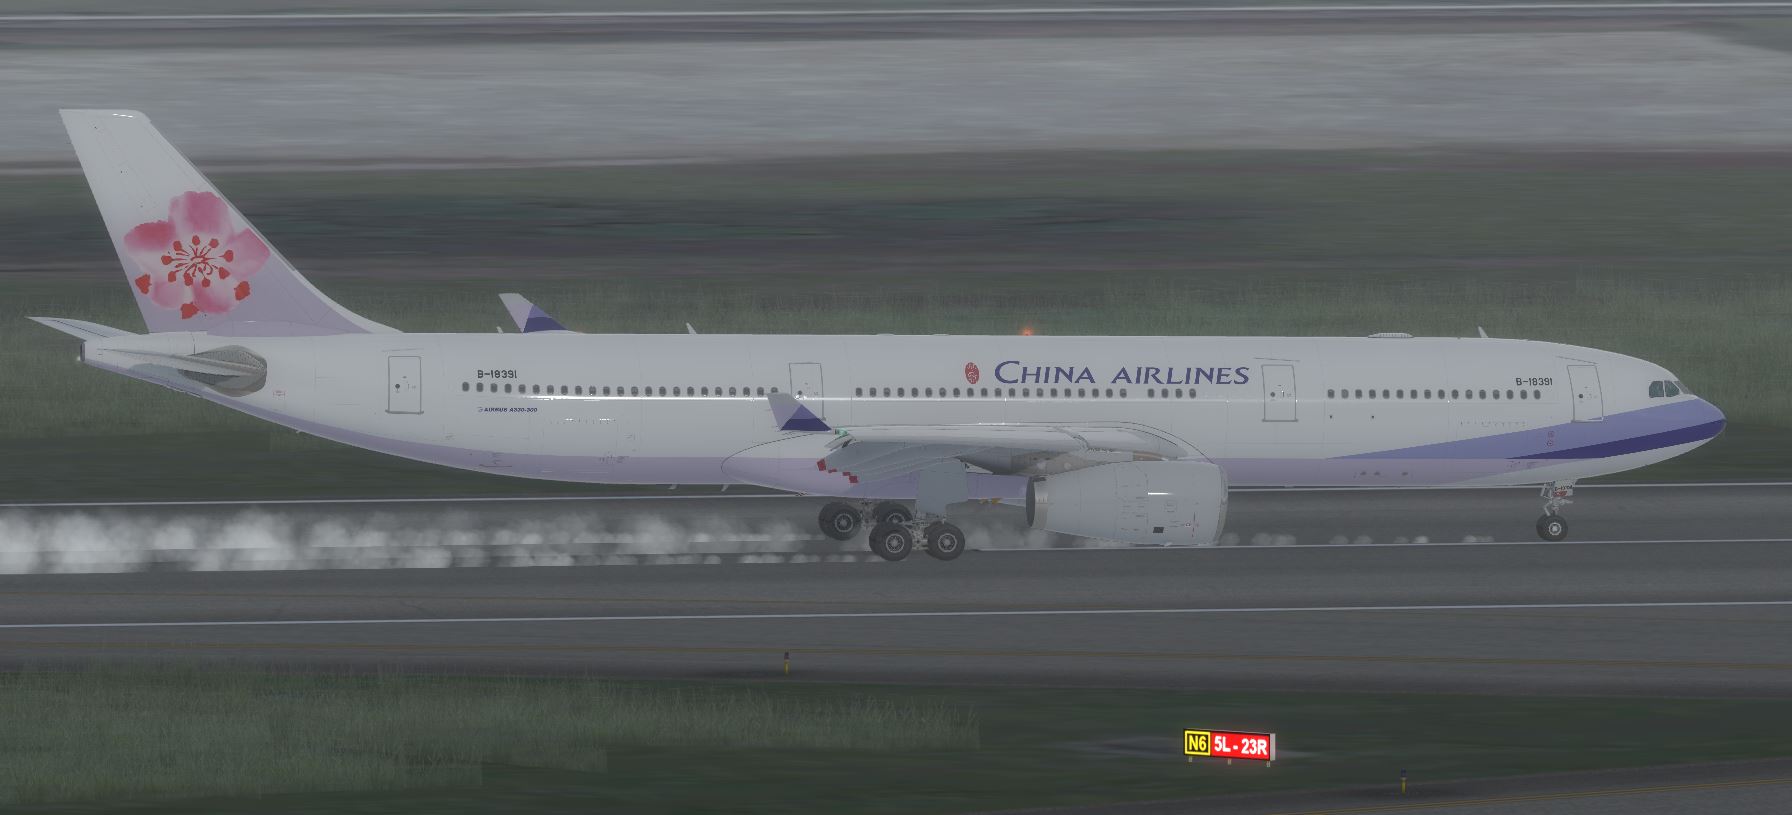 AS A330 ChinaAirline-9155 